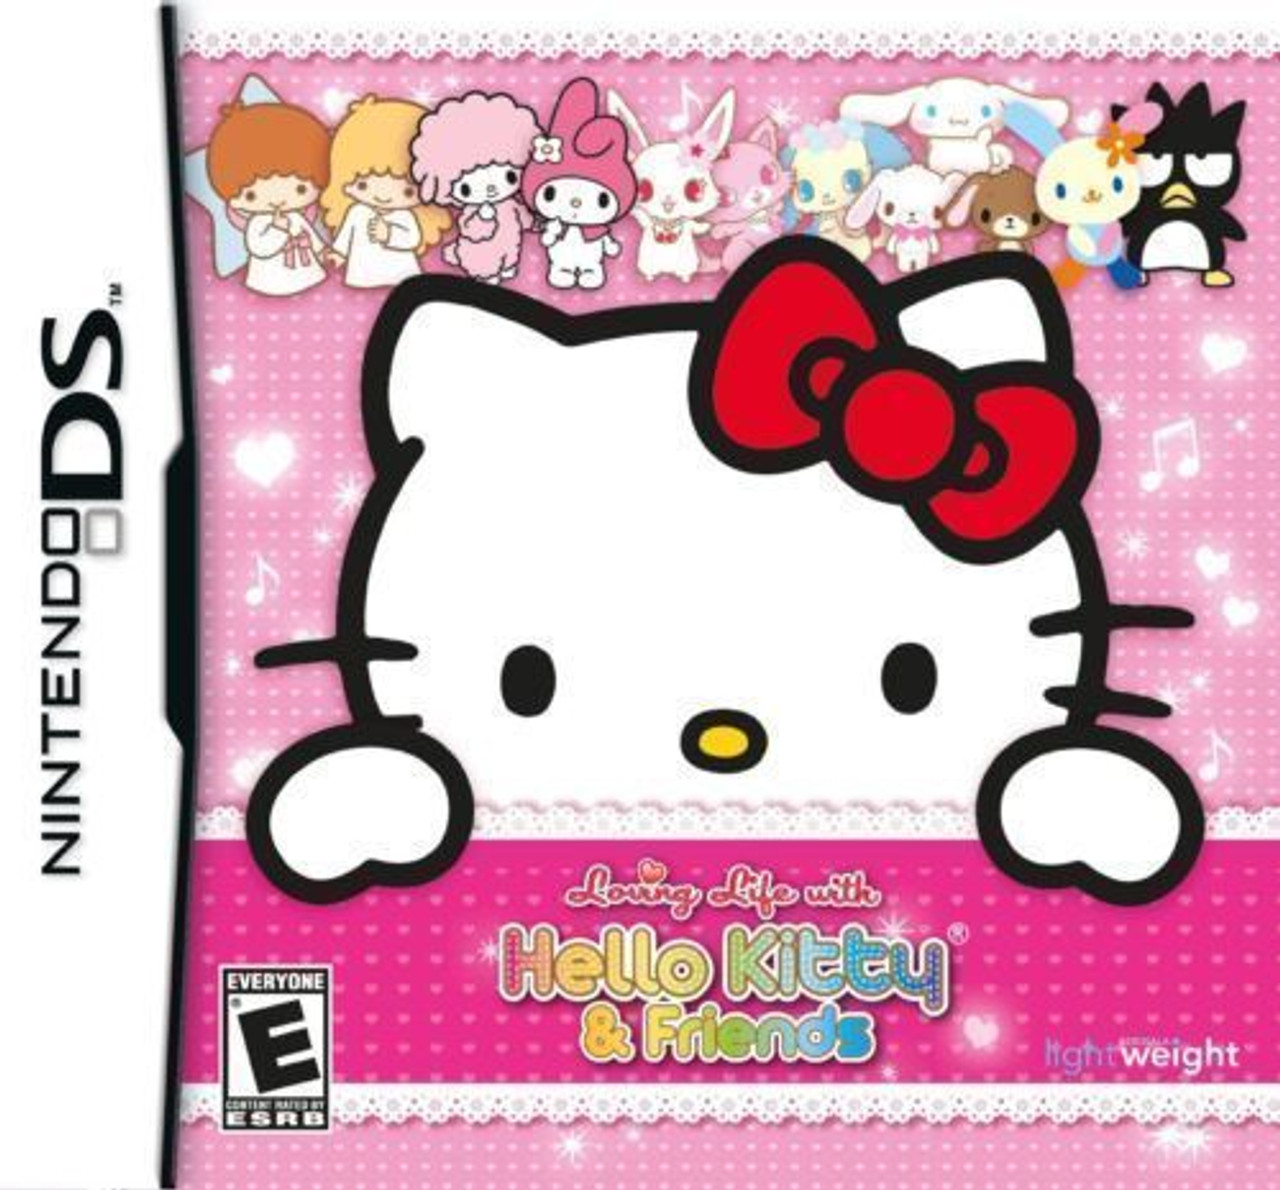  Hello  Kitty  Friends Nintendo DS  Game Nintendo DS  Game 